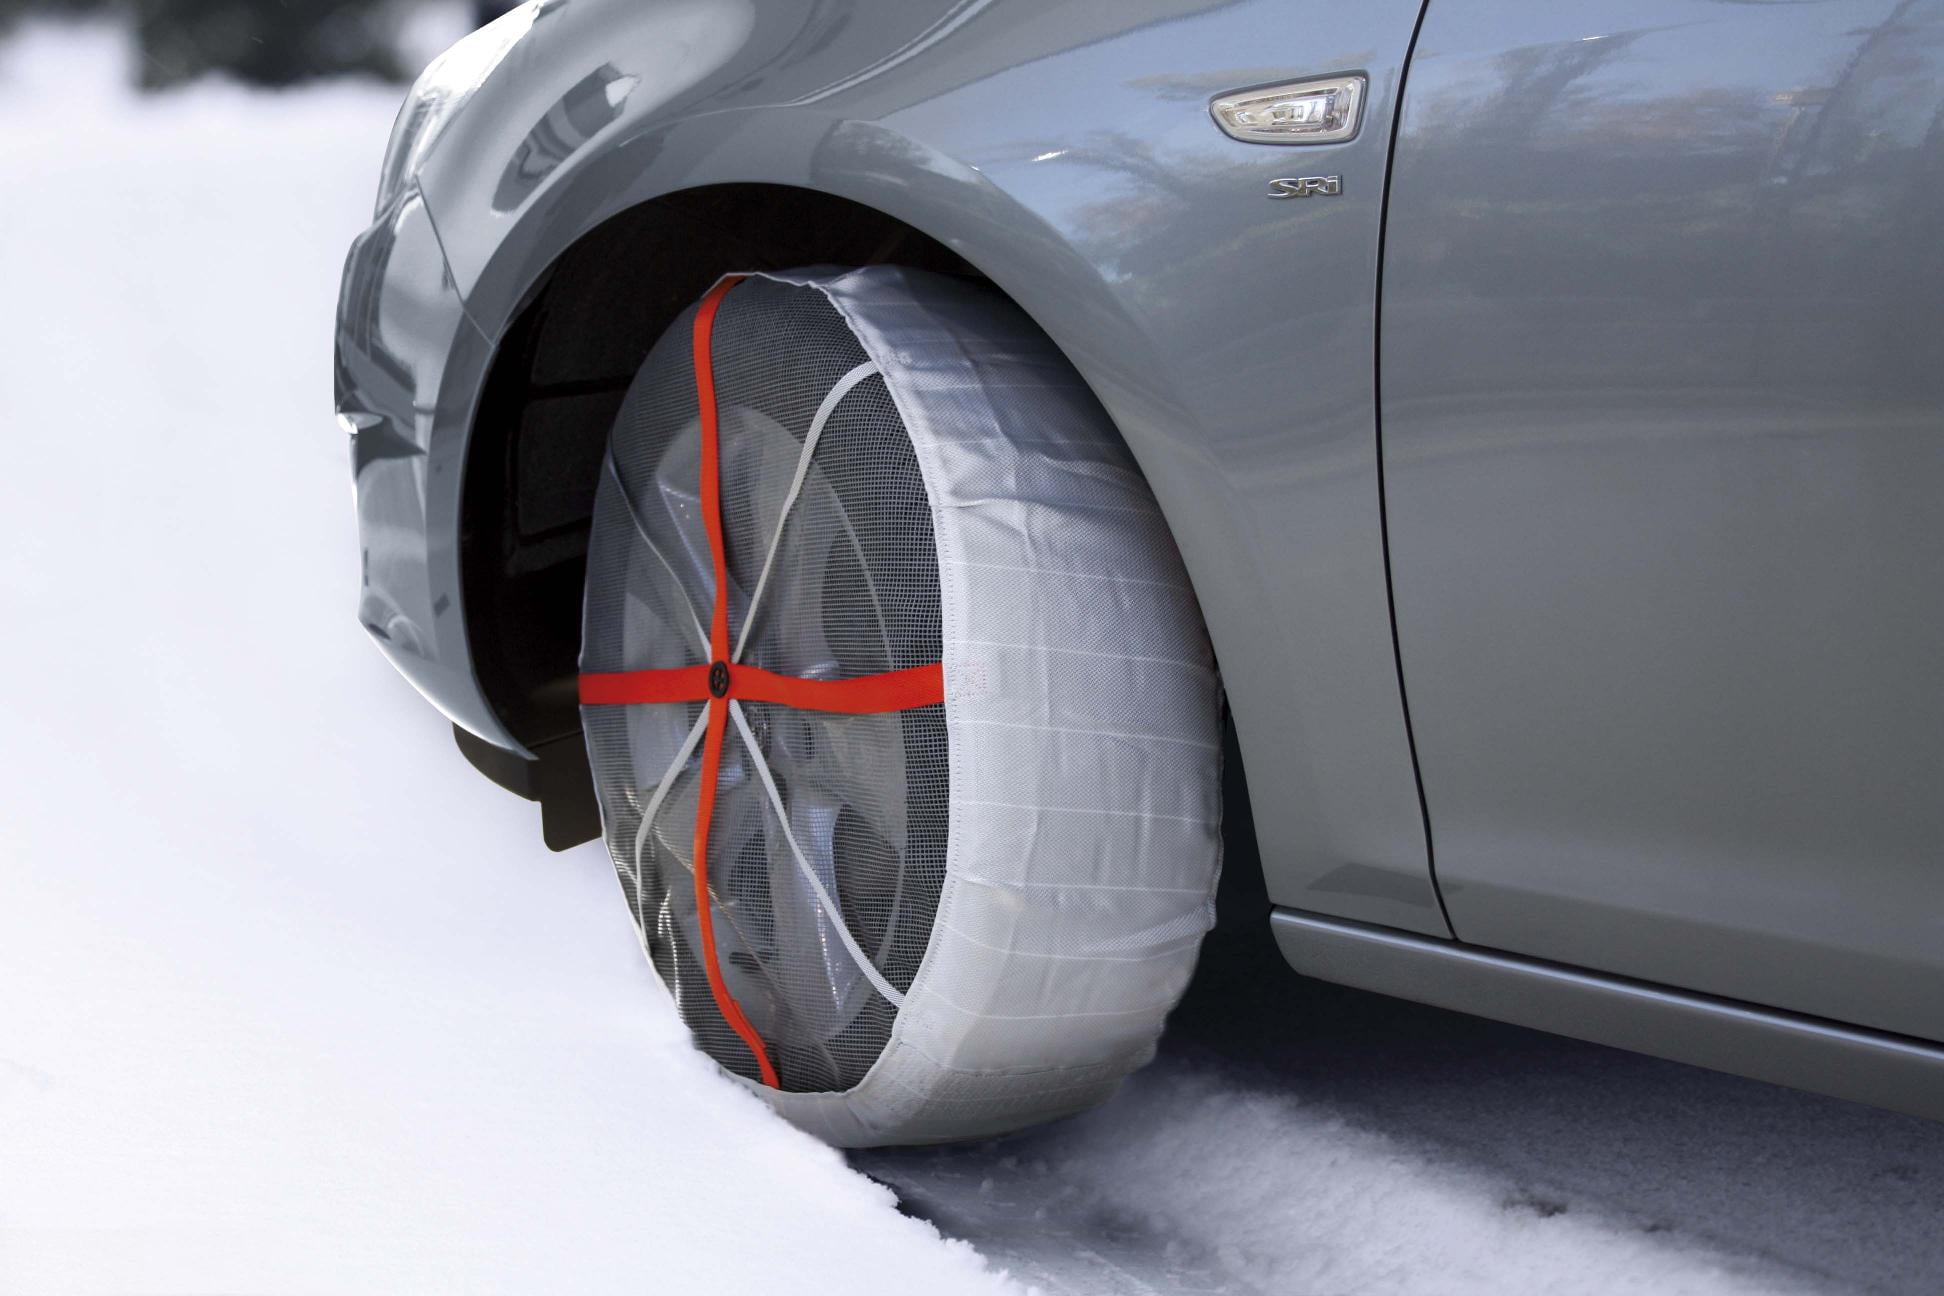 AutoSock Snow Socks 685 Traction Wheel Covers for Snow and Ice.